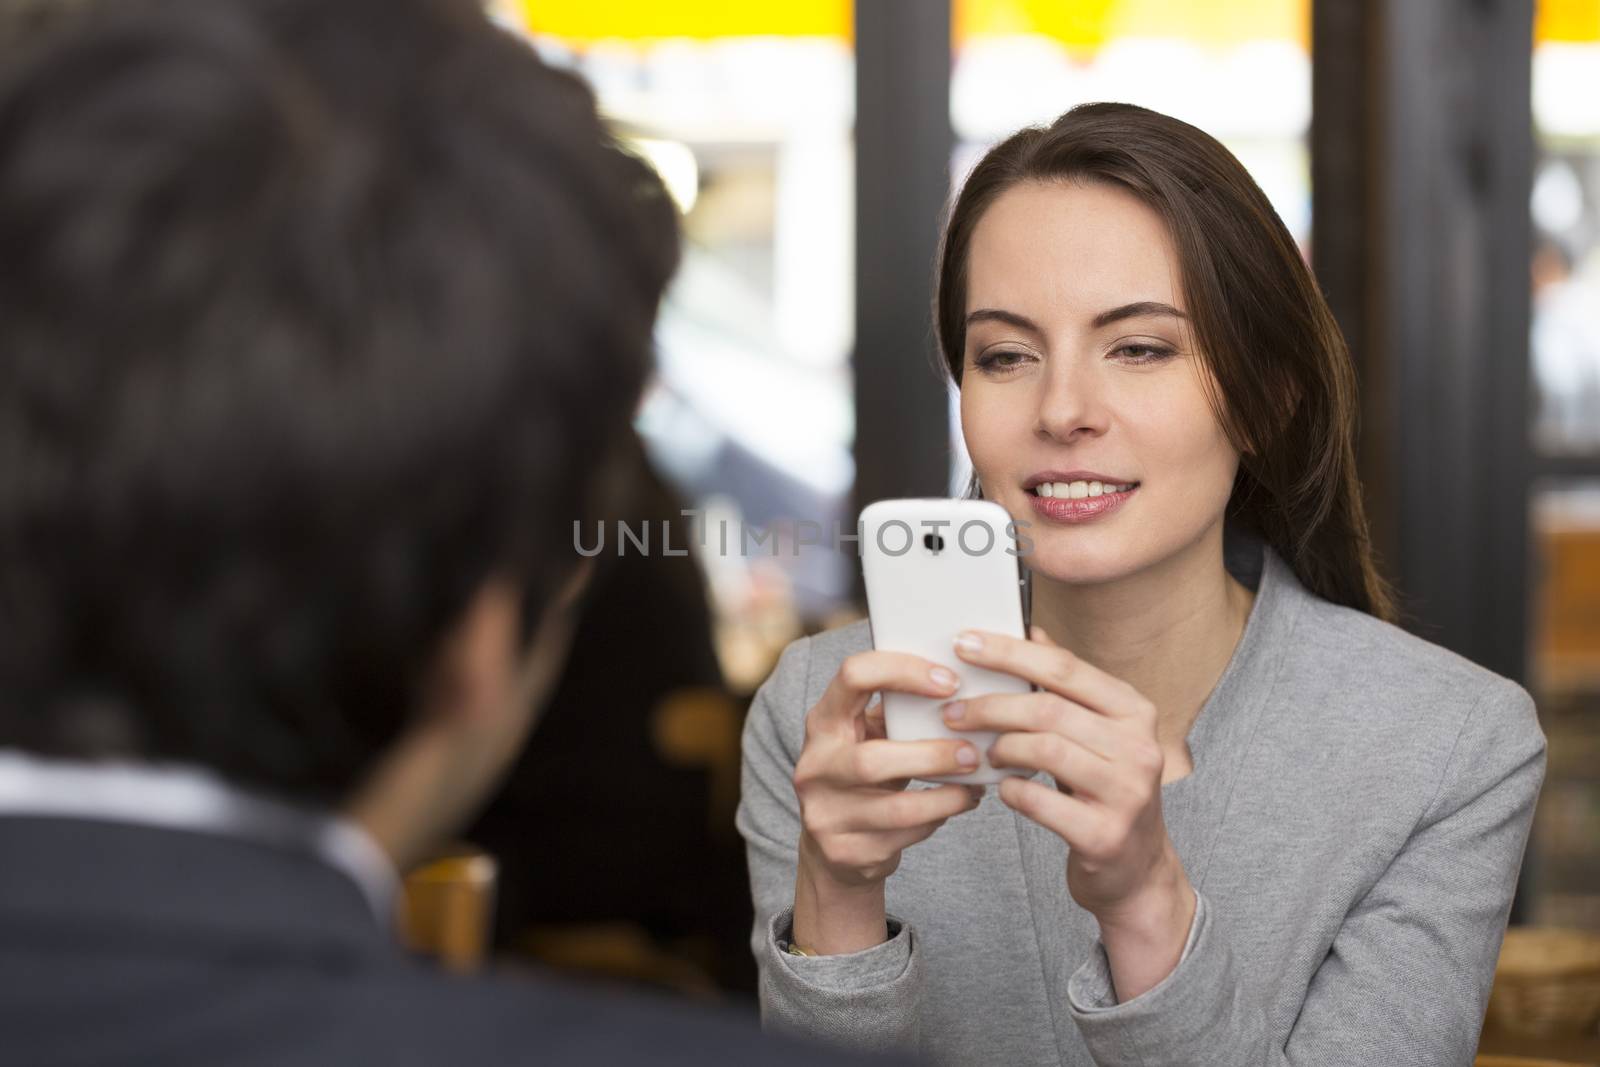 Couple in restaurant breakfasted, woman is on the phone, sms, su by LDProd